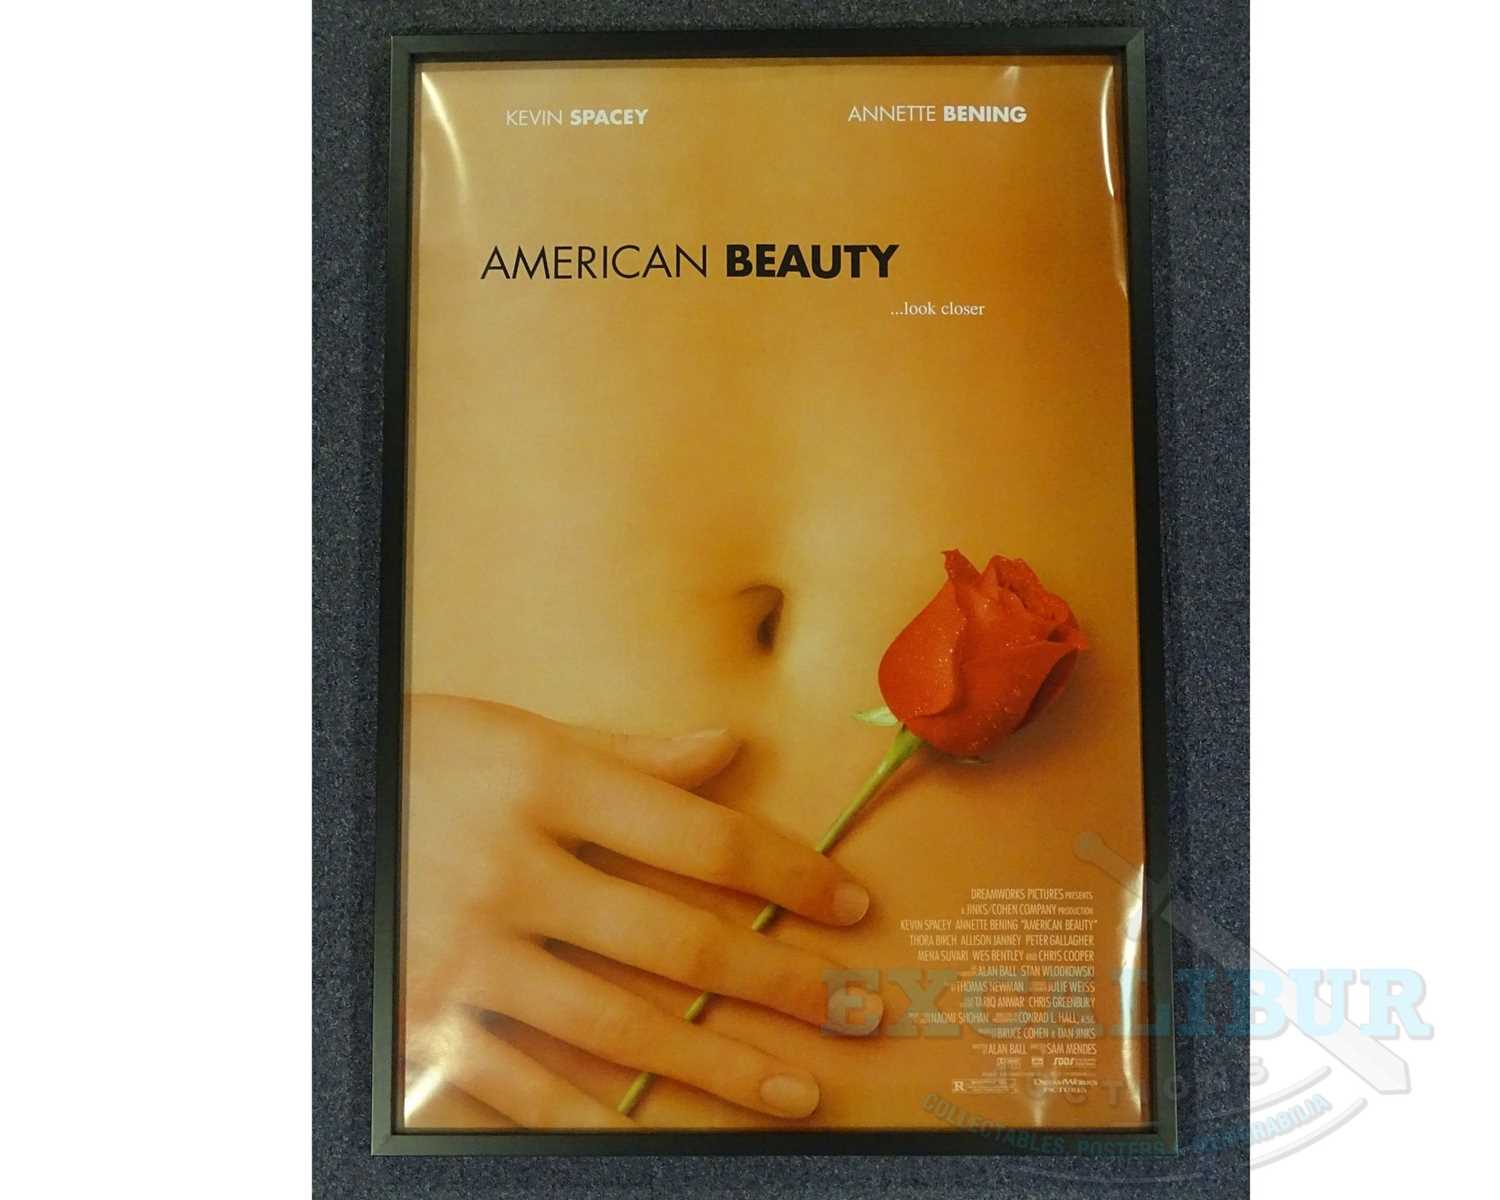 AMERICAN BEAUTY (1999) - US one sheet presented framed and glazed - poster was in excellent